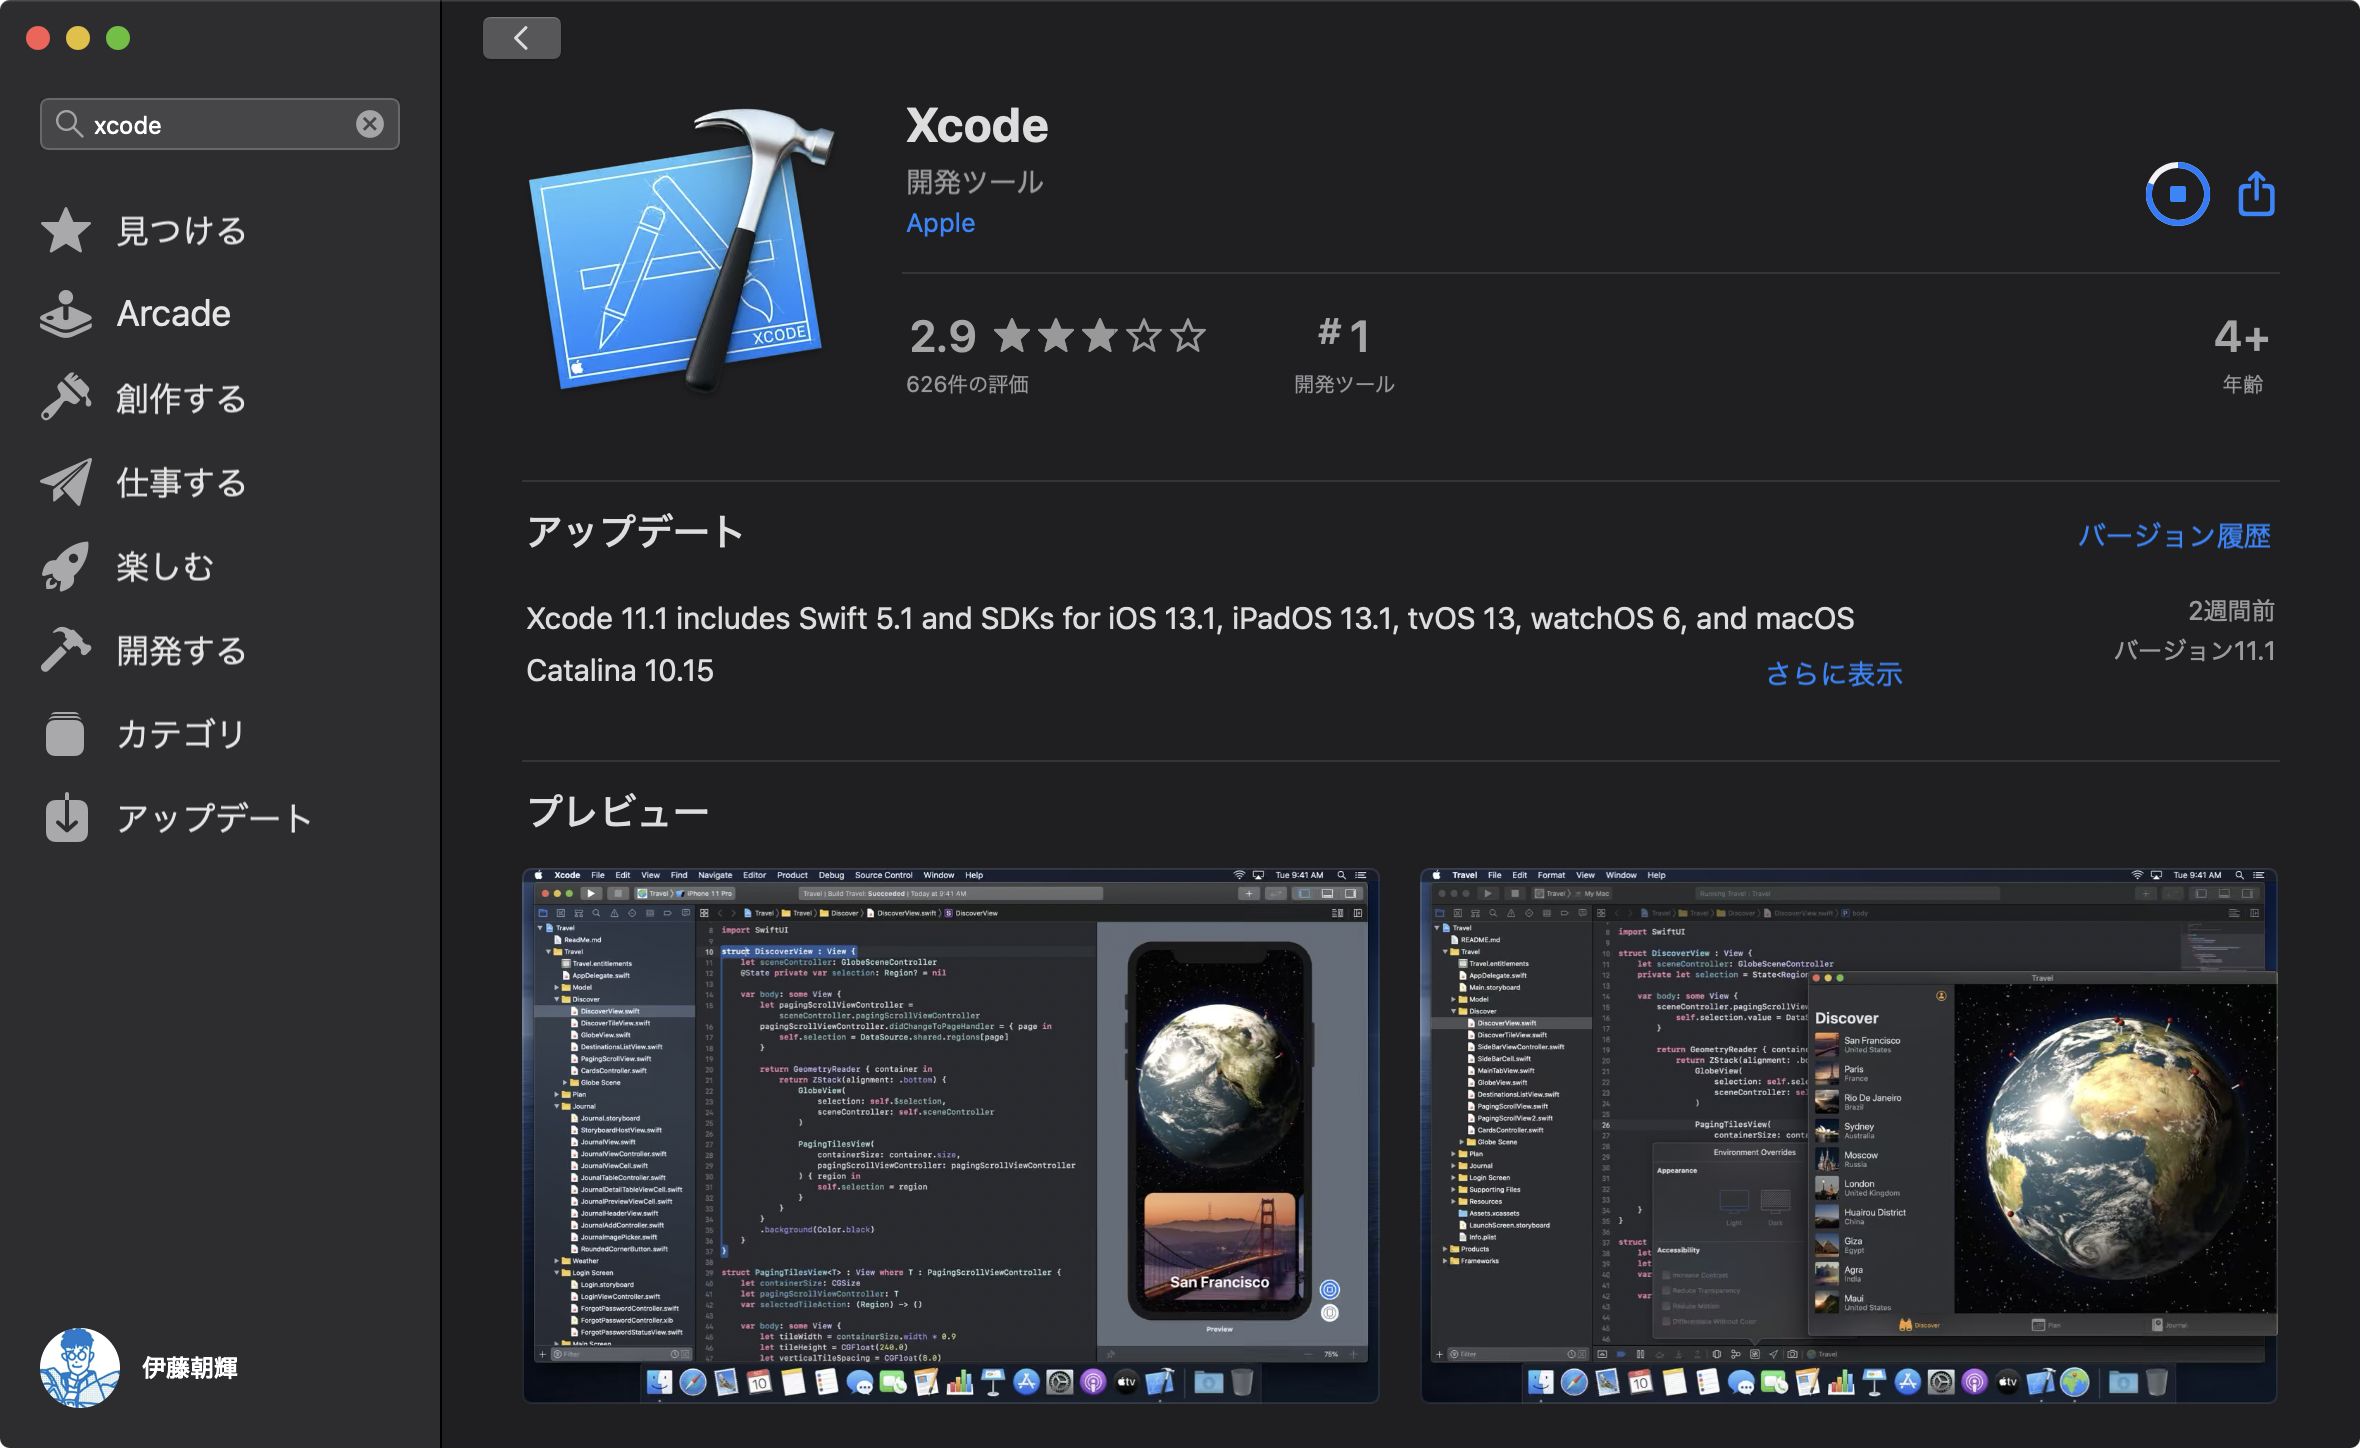 xcode for mac os 10.13